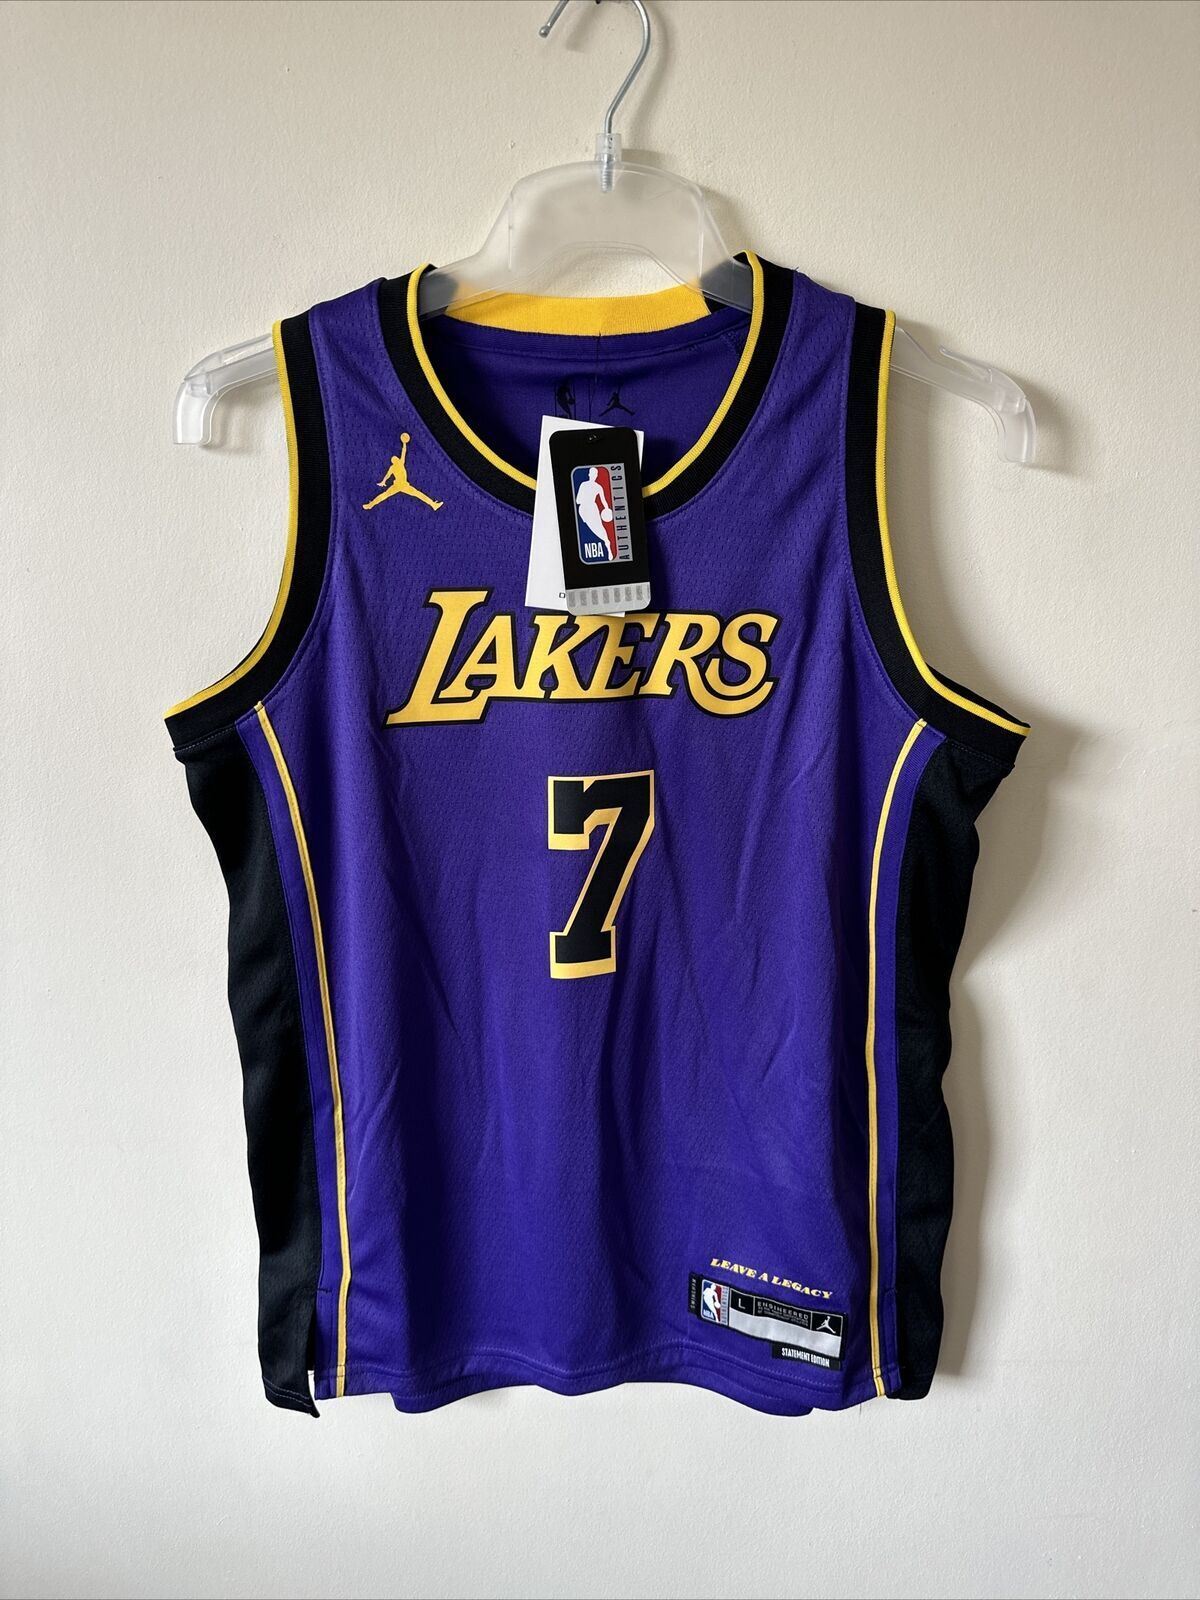 Nike NBA LA Lakers Statement Edition Jersey MOHAMED 7 Youth 12-13 Years